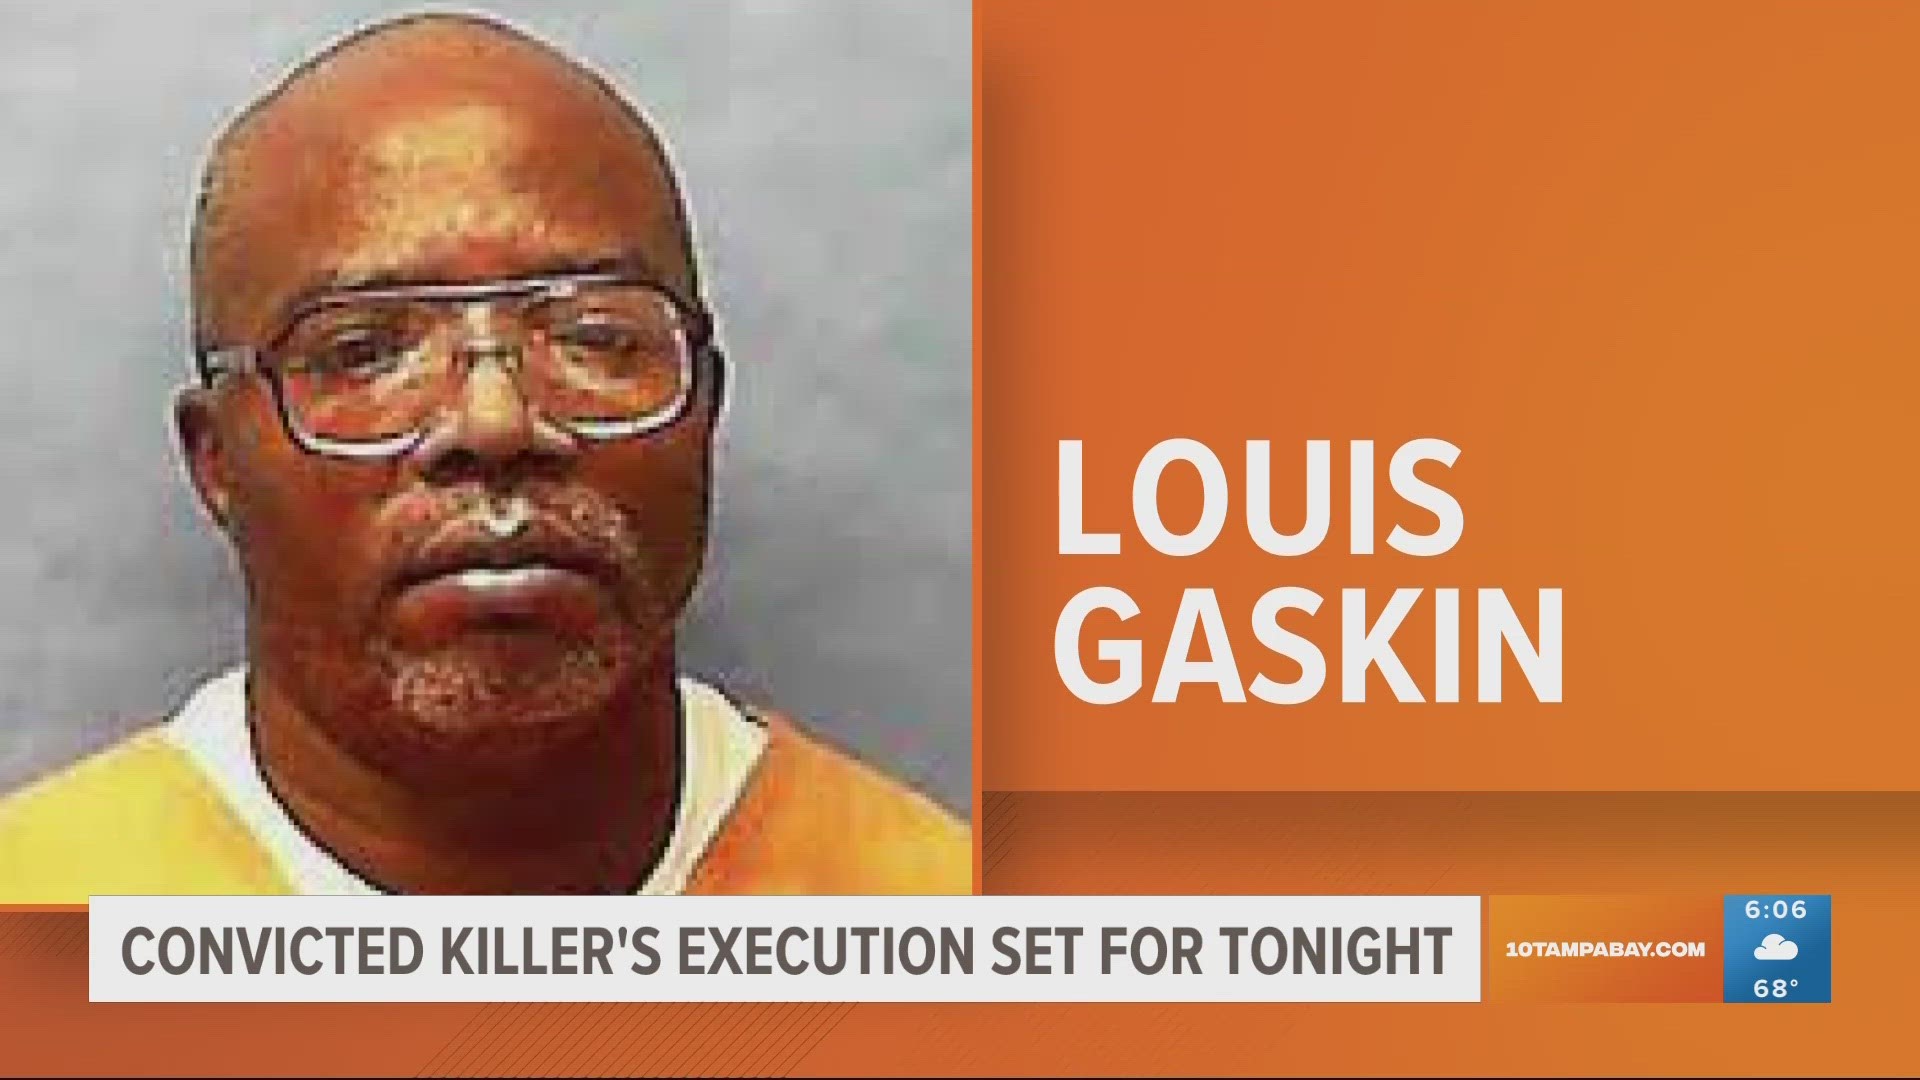 Local media reported at the time that Gaskin quickly confessed to the crimes and told a psychologist before his trial that he knew what he was doing.